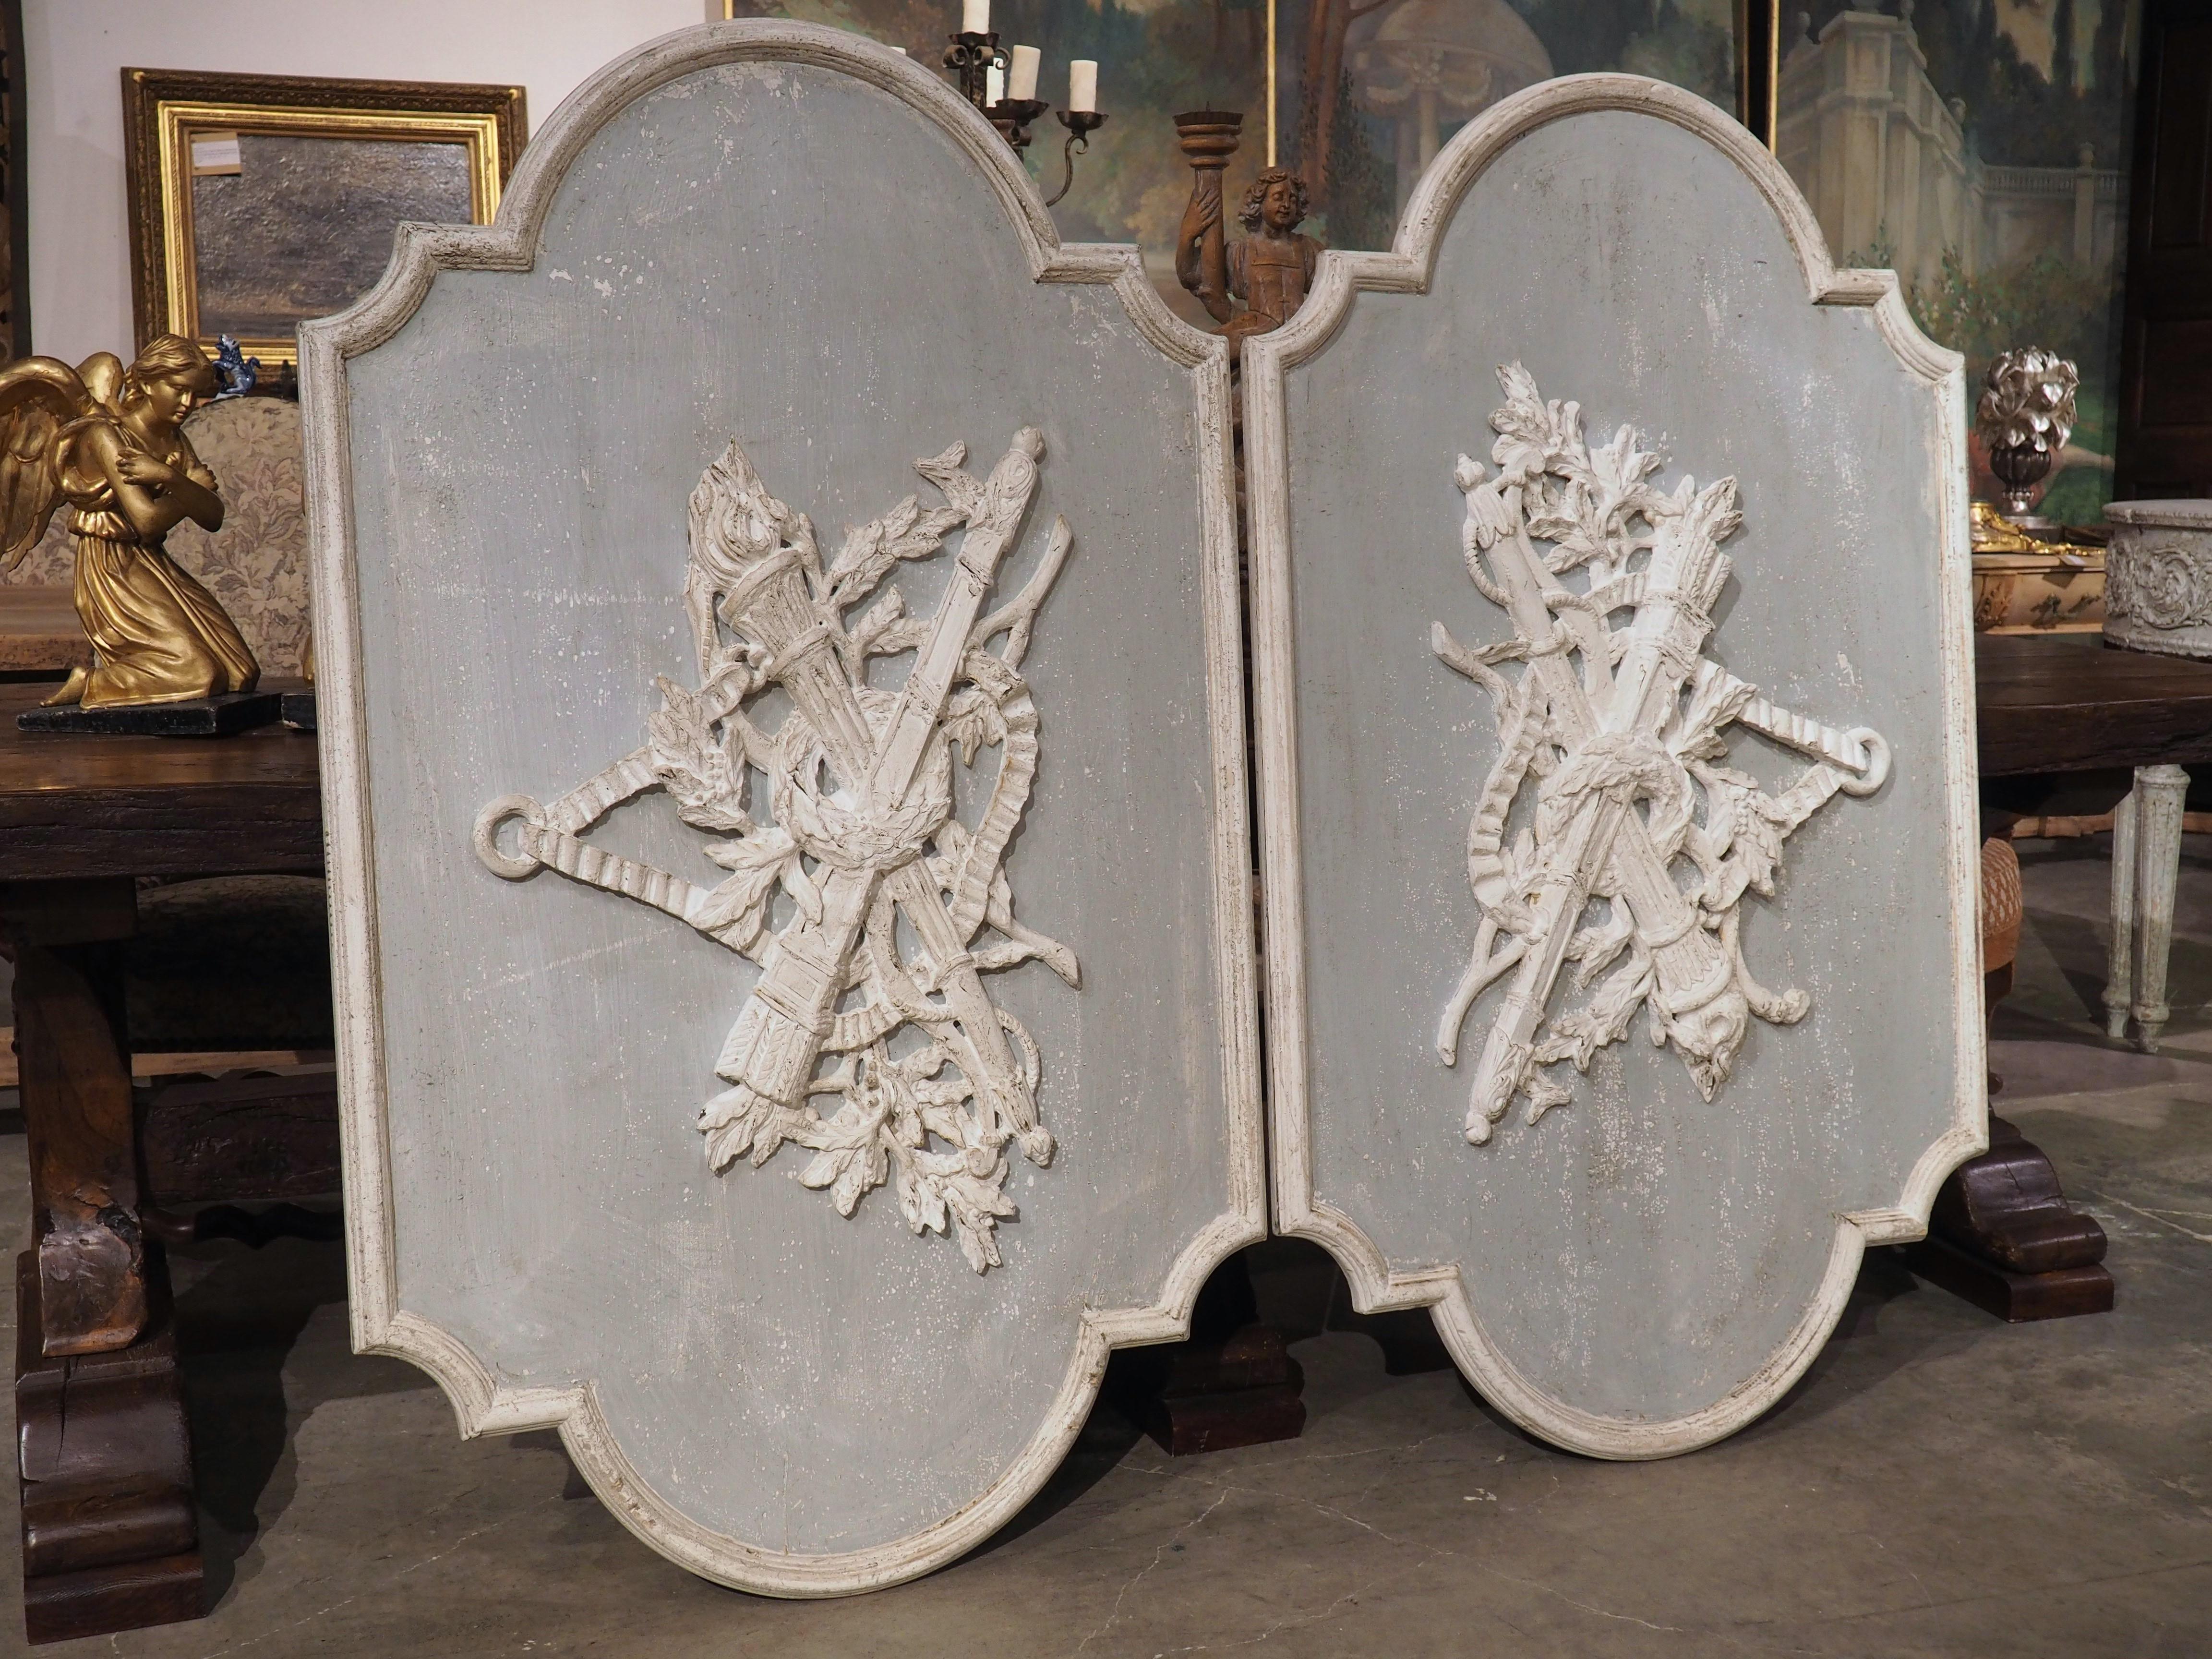 Carvings with a military, musical, hunting, or agricultural theme, known as trophies, became popular during the period of Louis XVI. This pair of large trophy panels have Neoclassical motifs (another hallmark of Louis XVI) painted in white over a